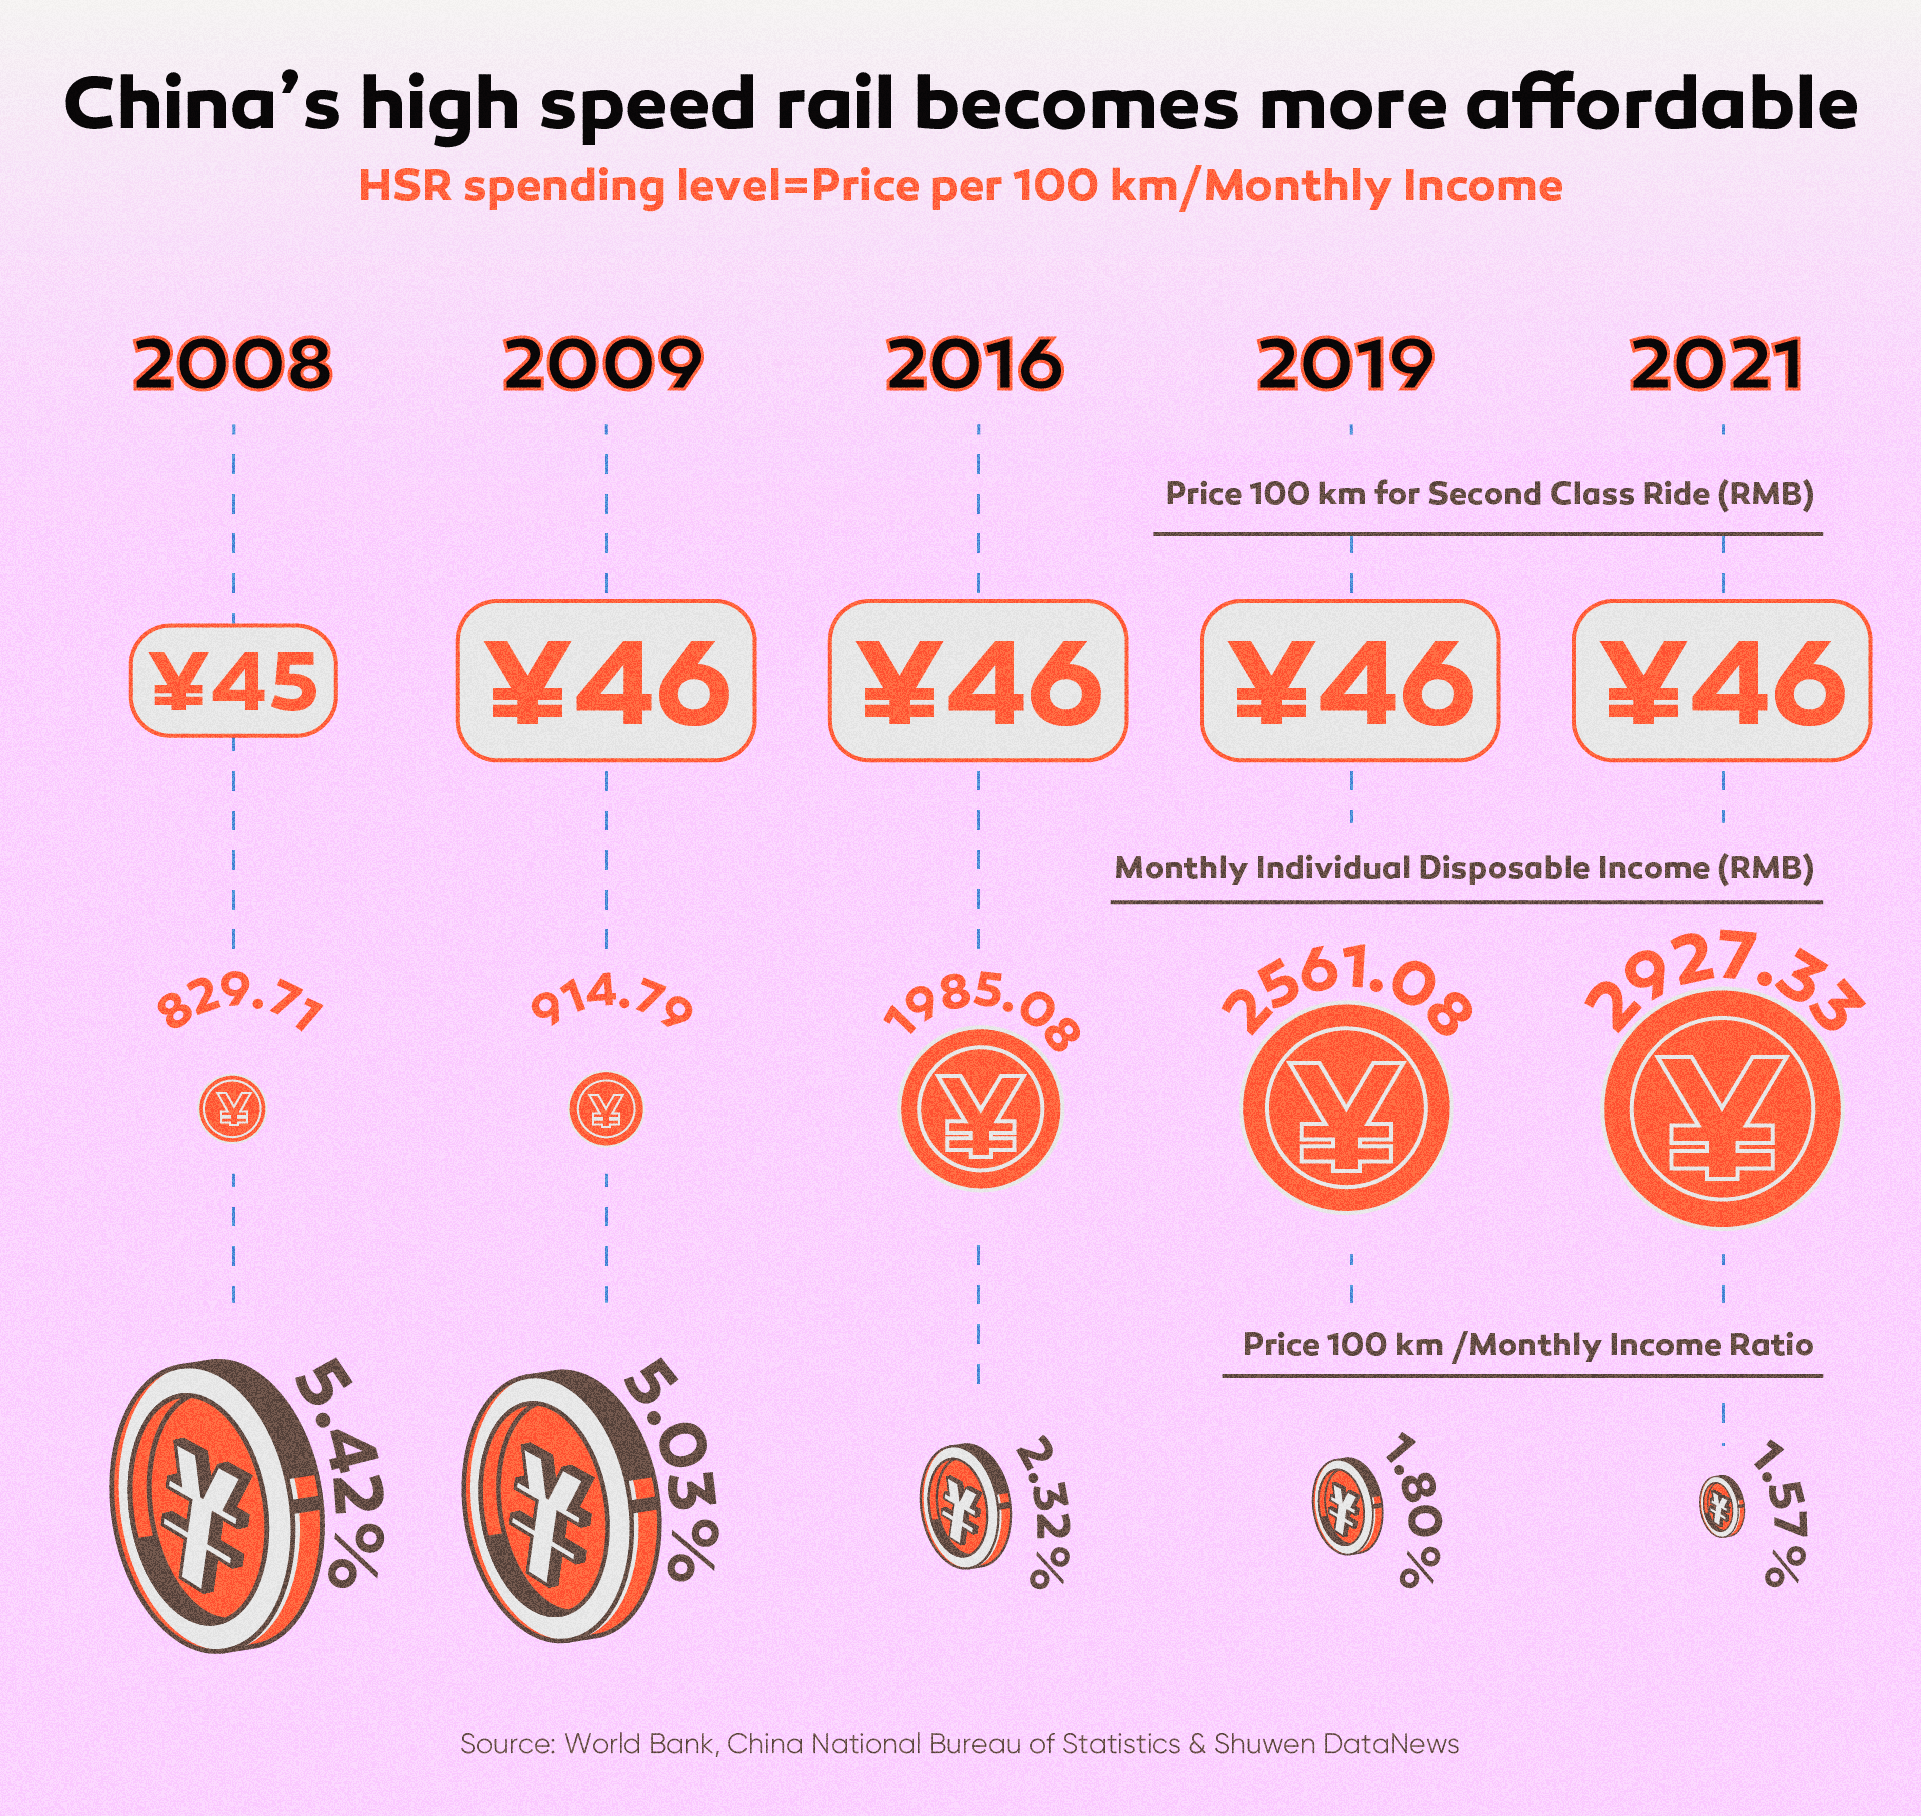 Are China's high speed rail tickets a good value? 